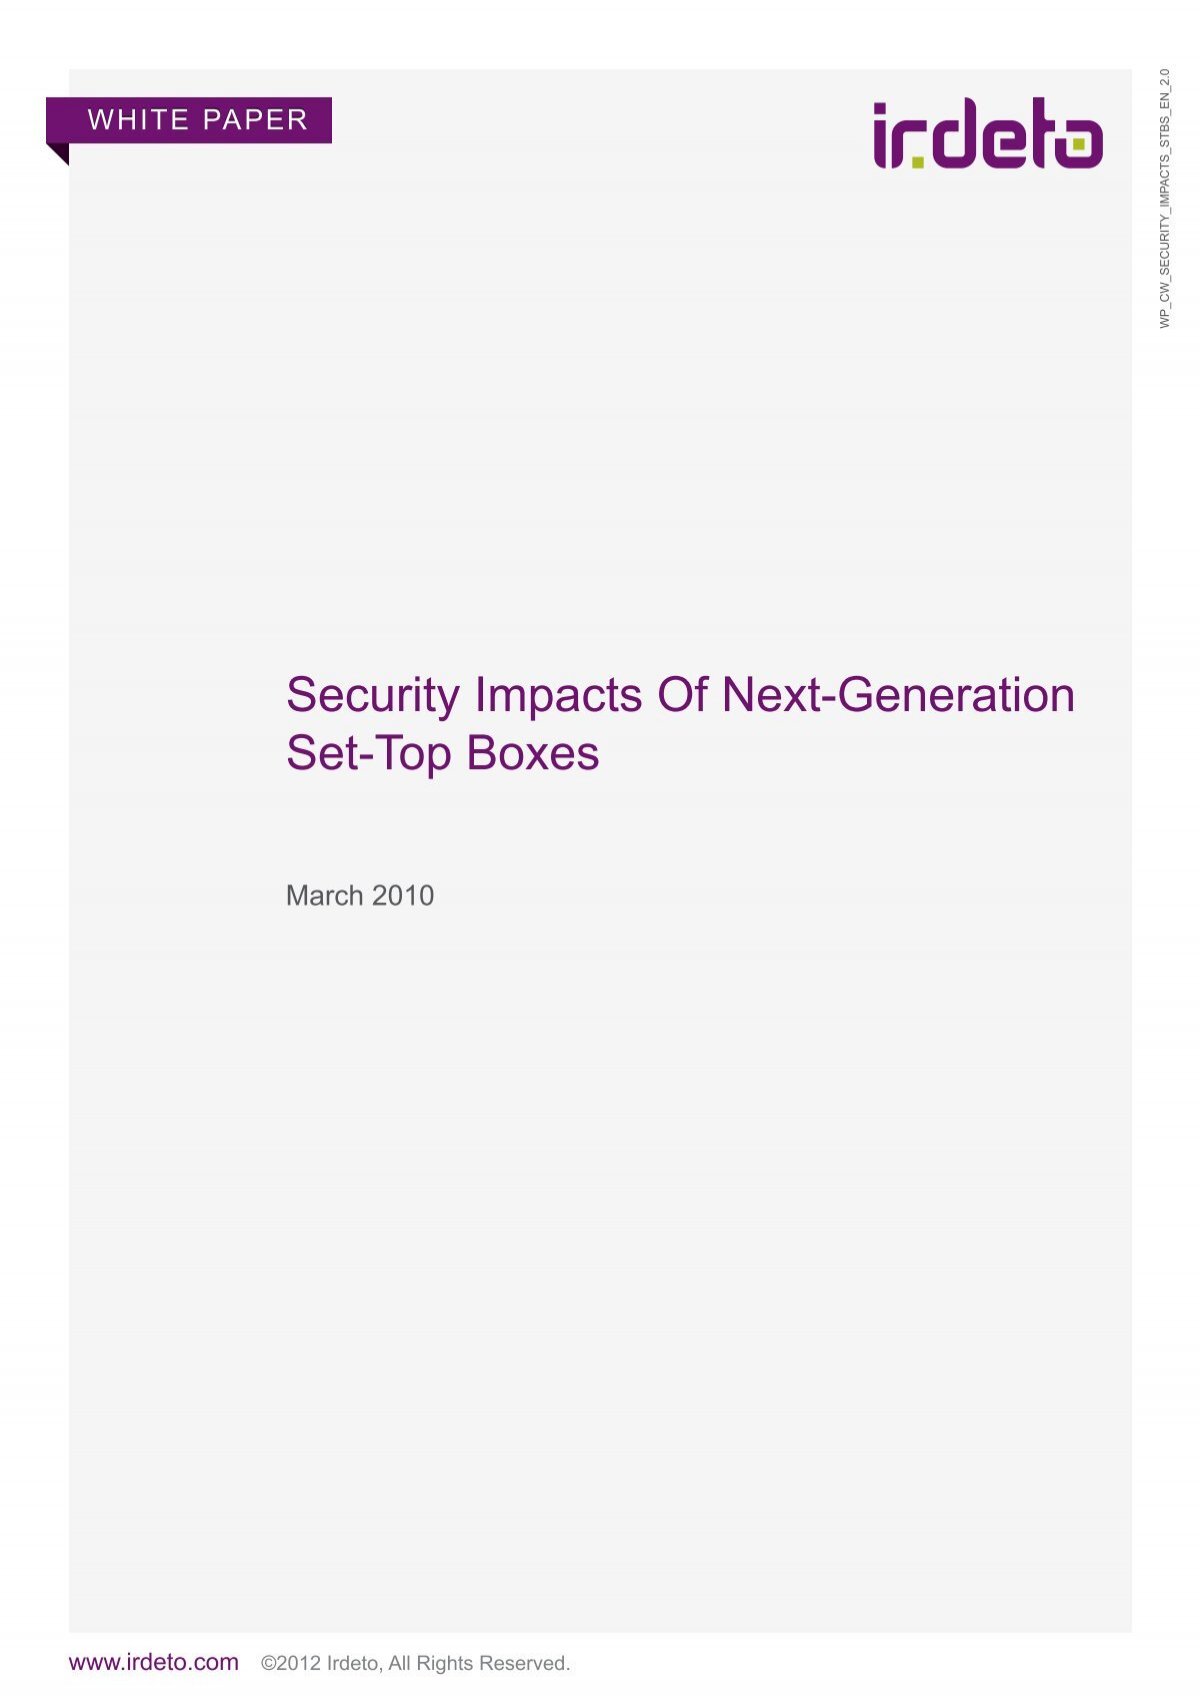 Security Impacts Of Next-Generation Set-Top Boxes - Irdeto